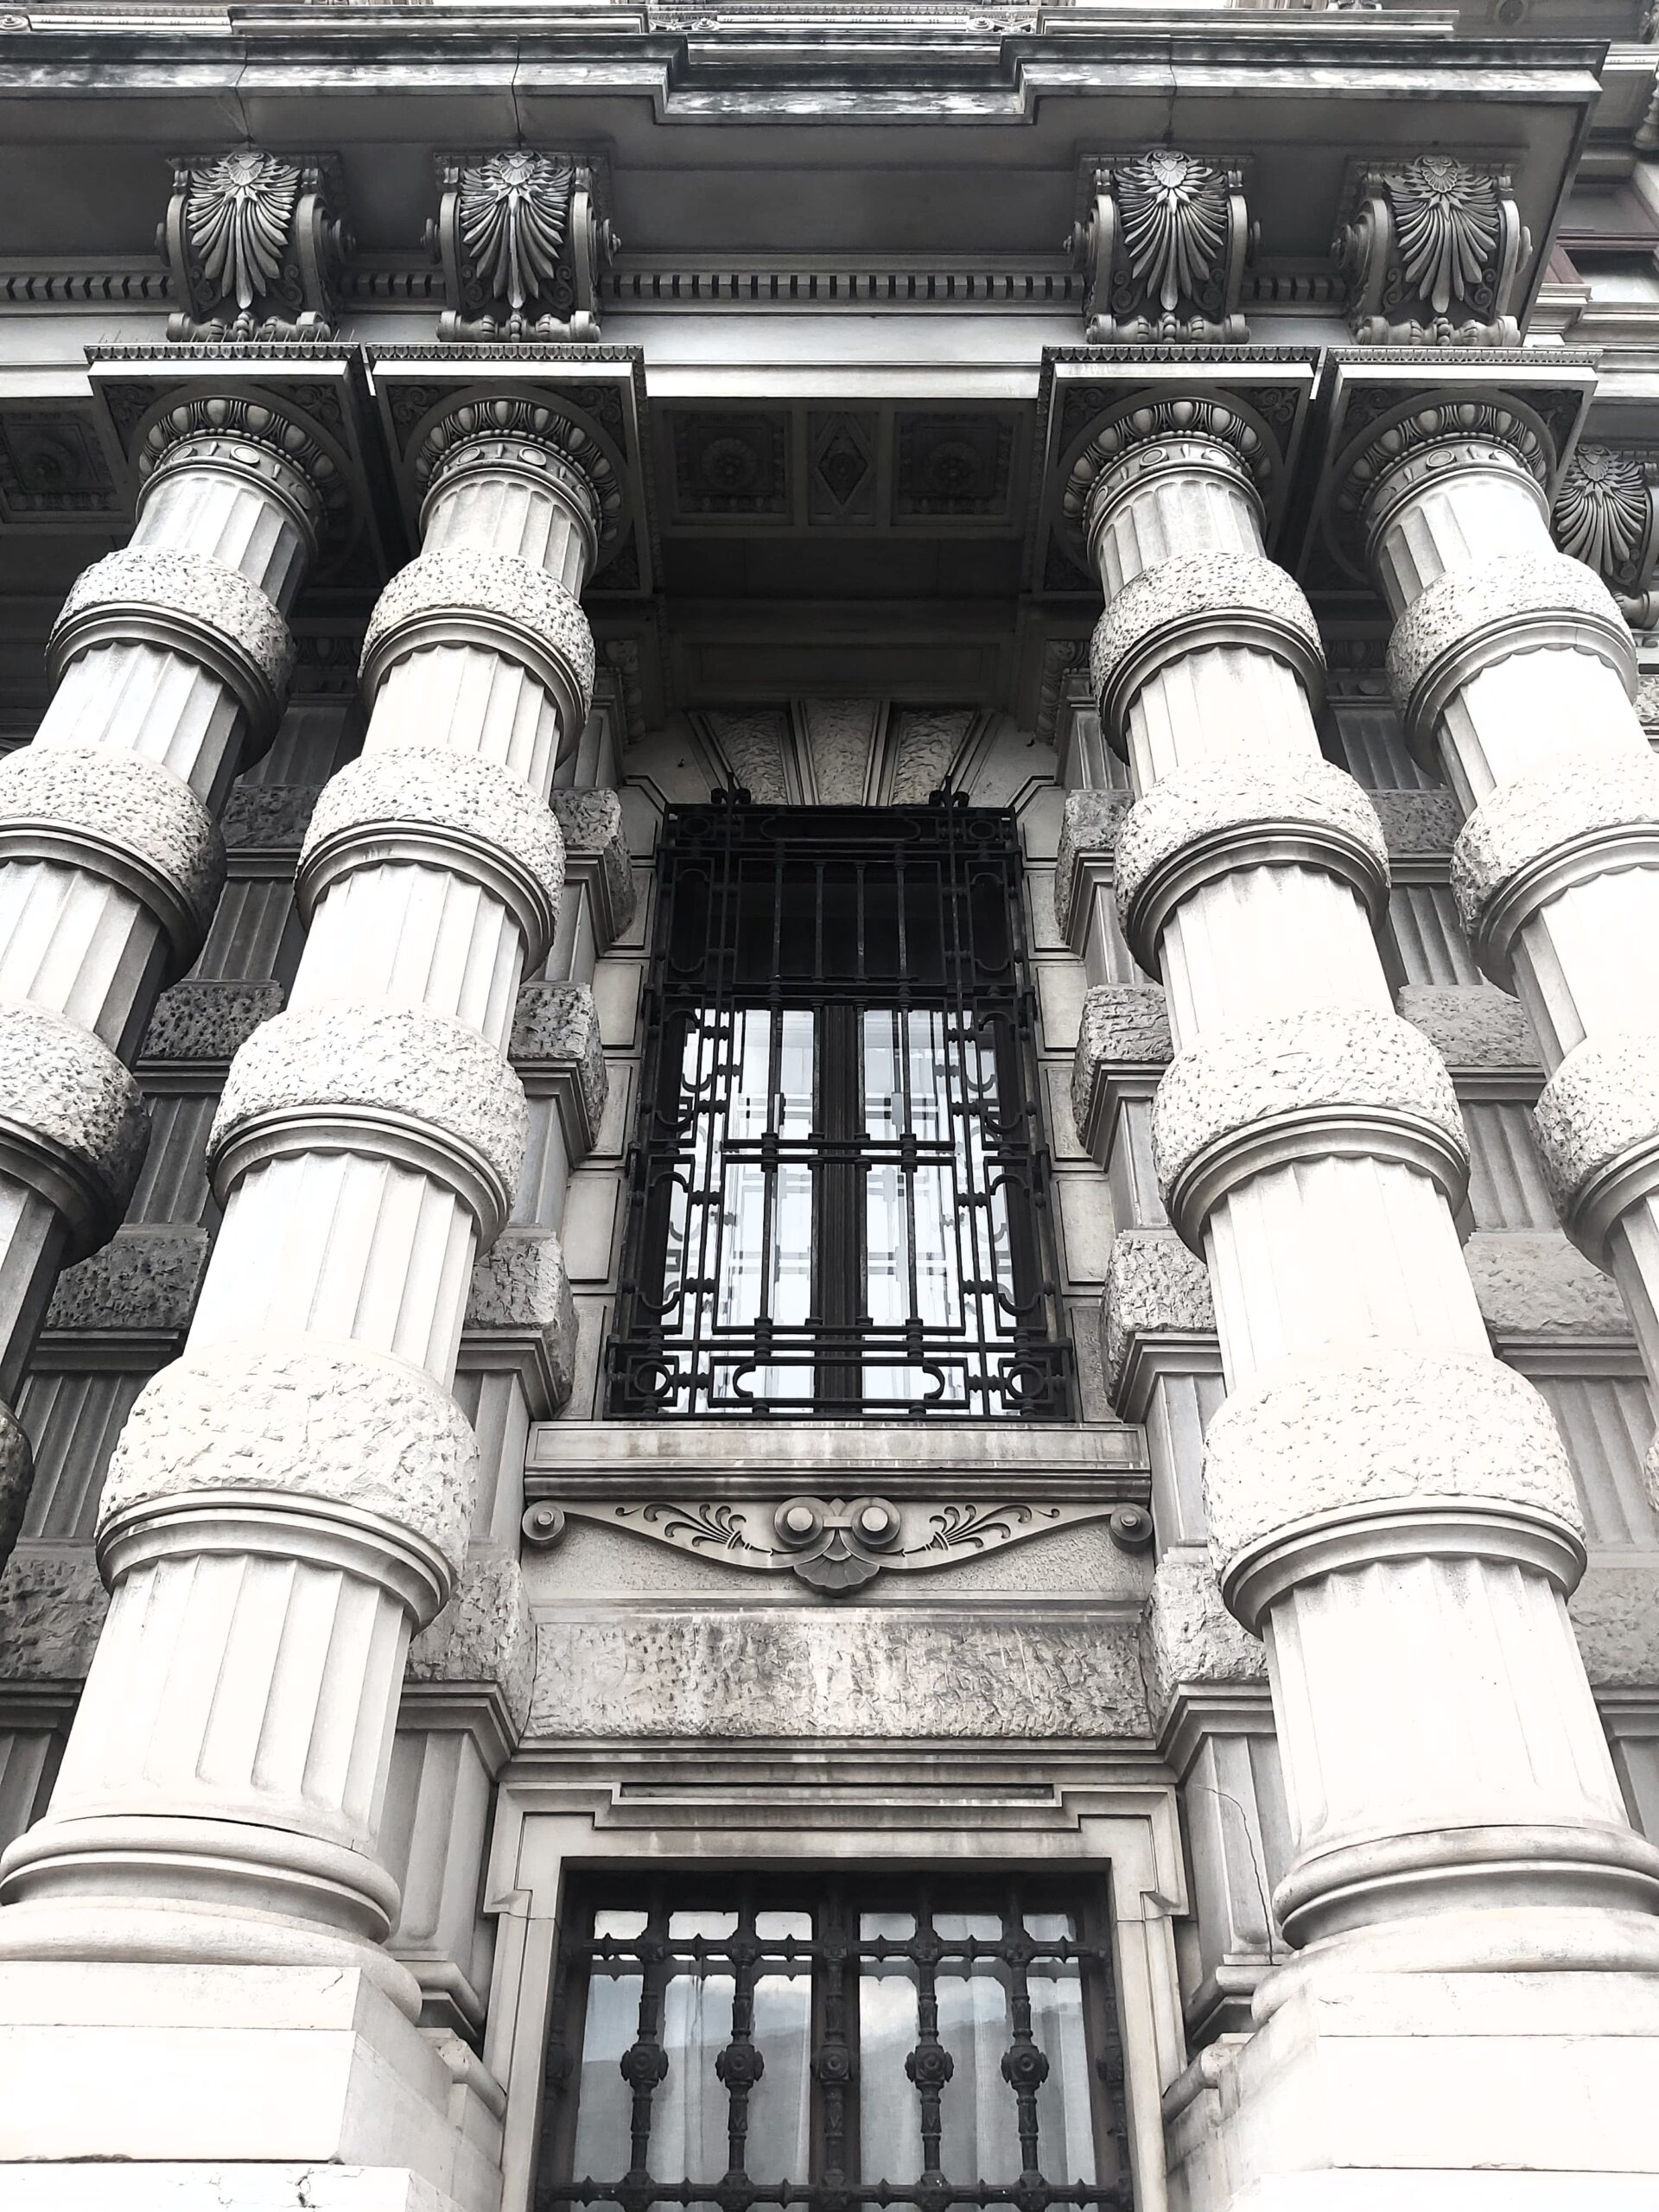 Columns and windows of a building in Trieste, Italy